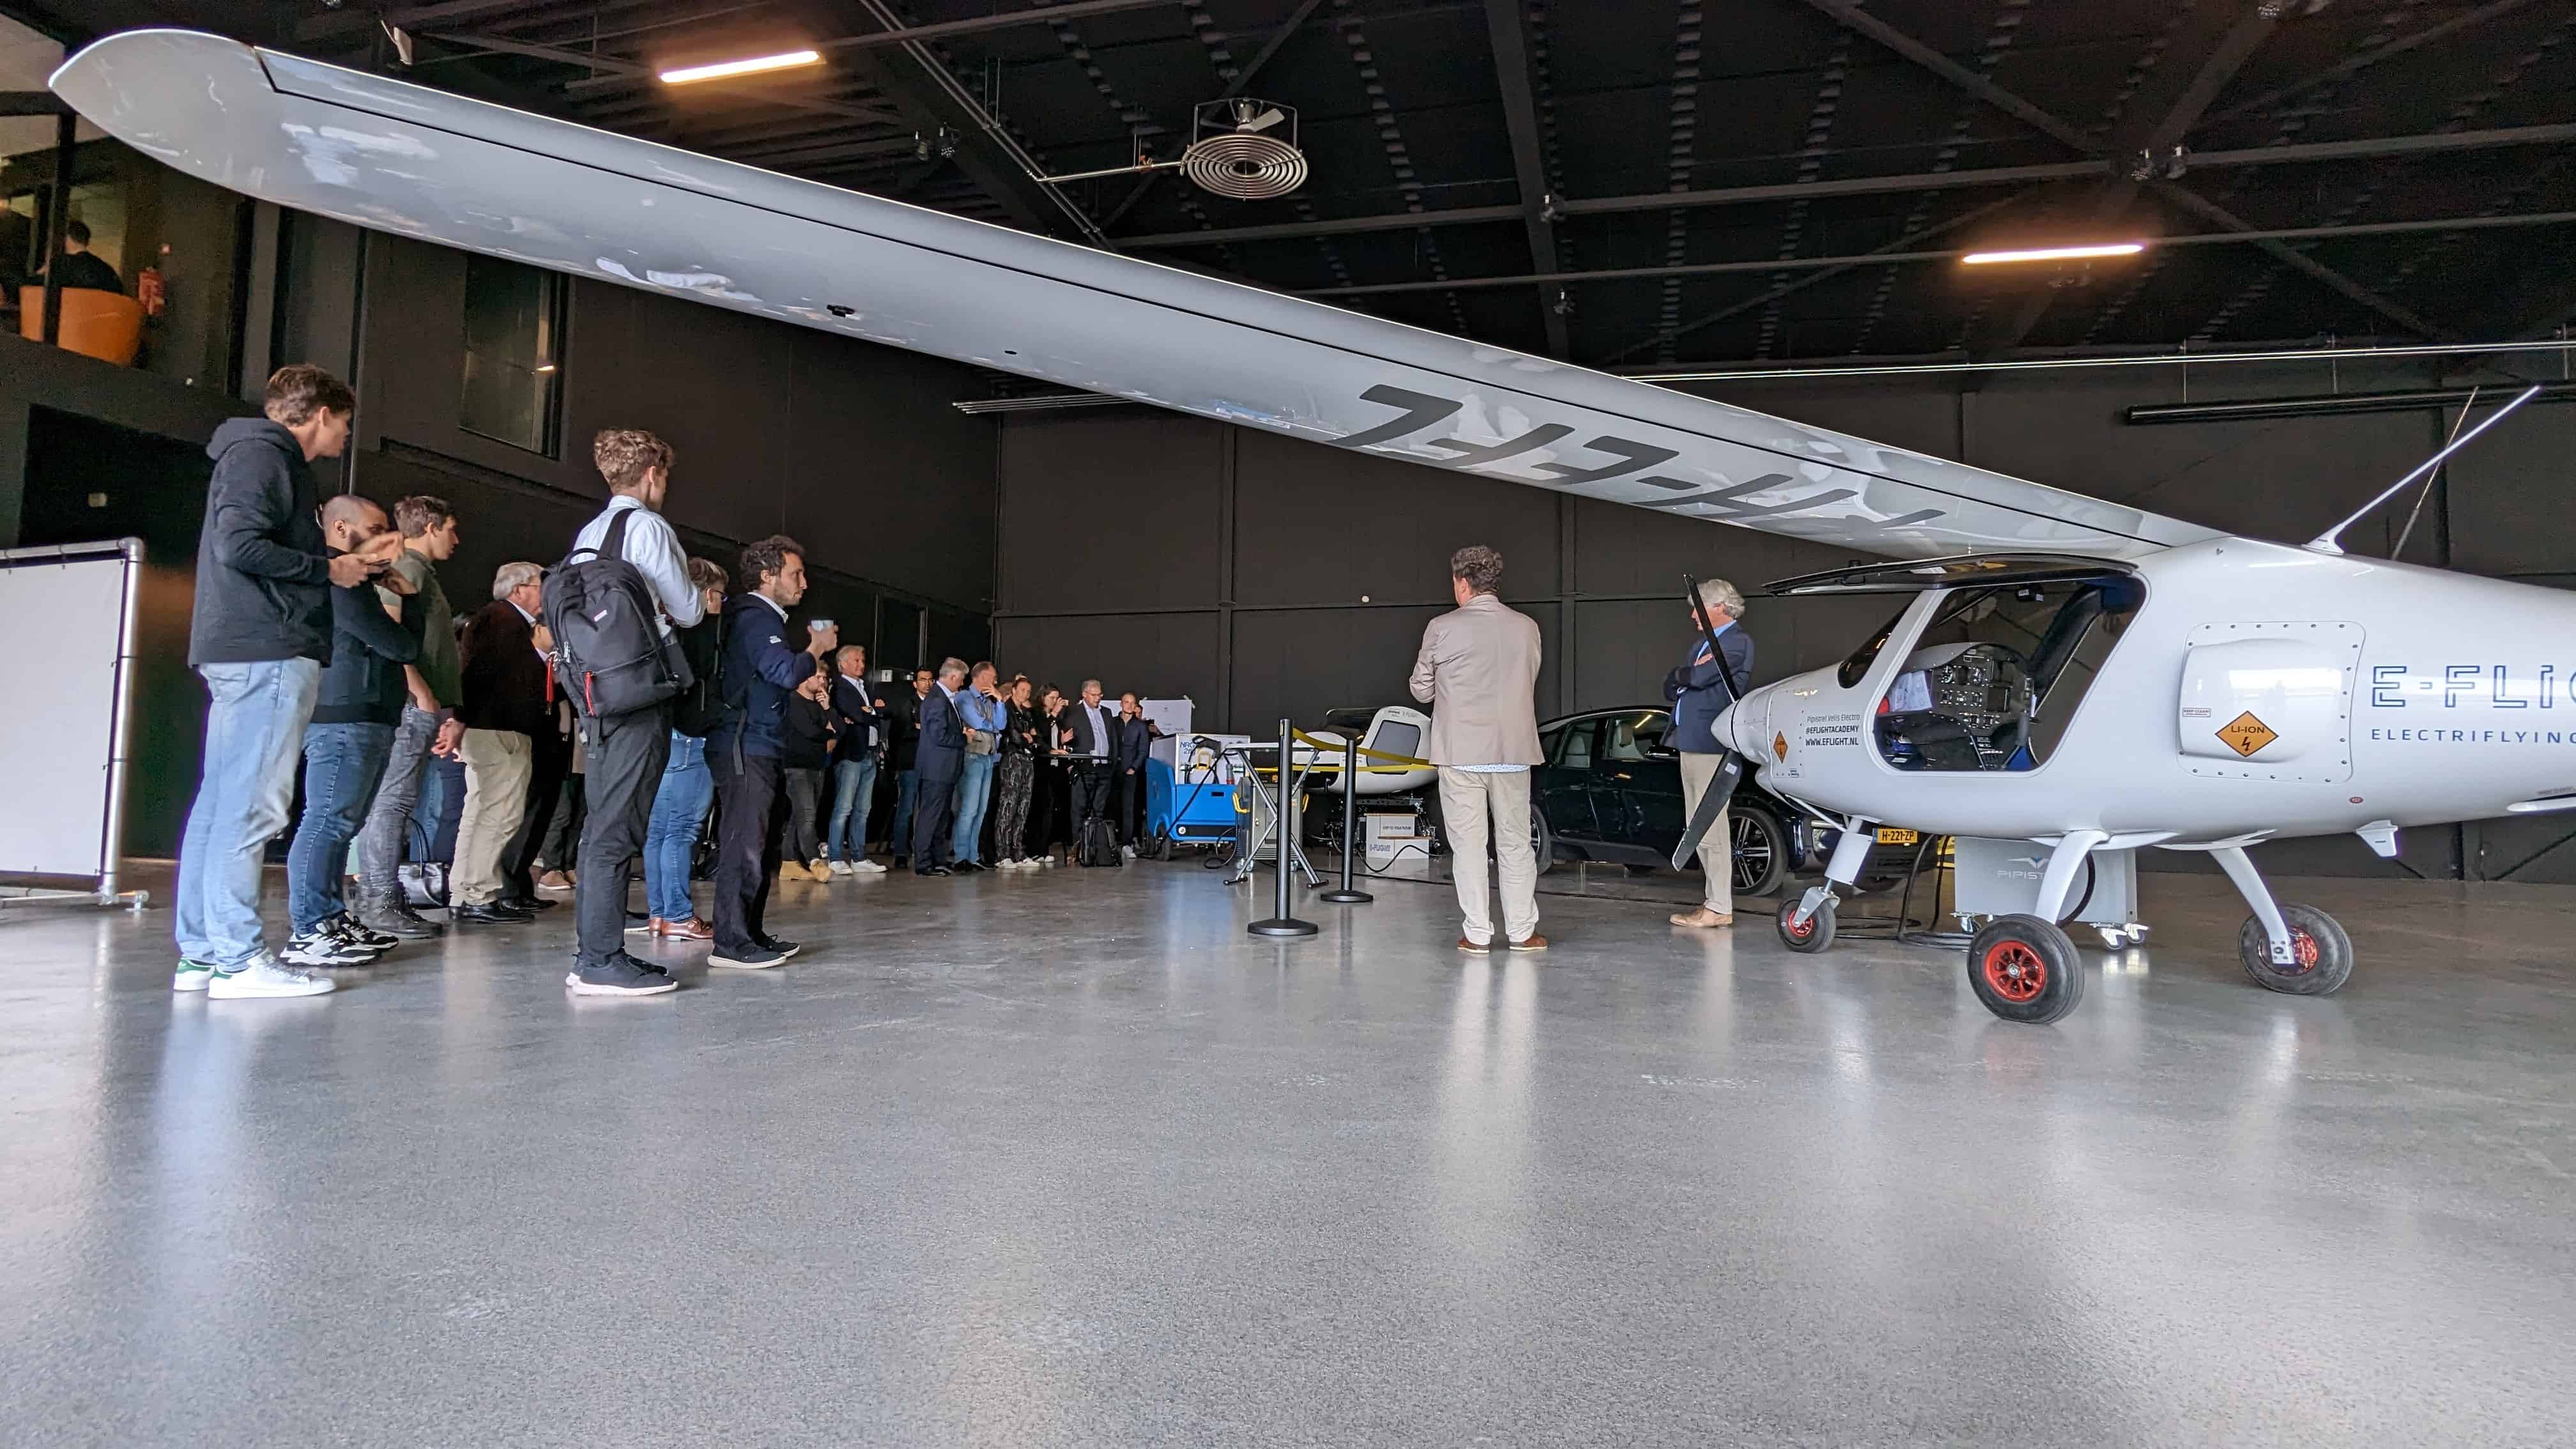 Electric flying: a sustainable solution for regional mobility within Europe